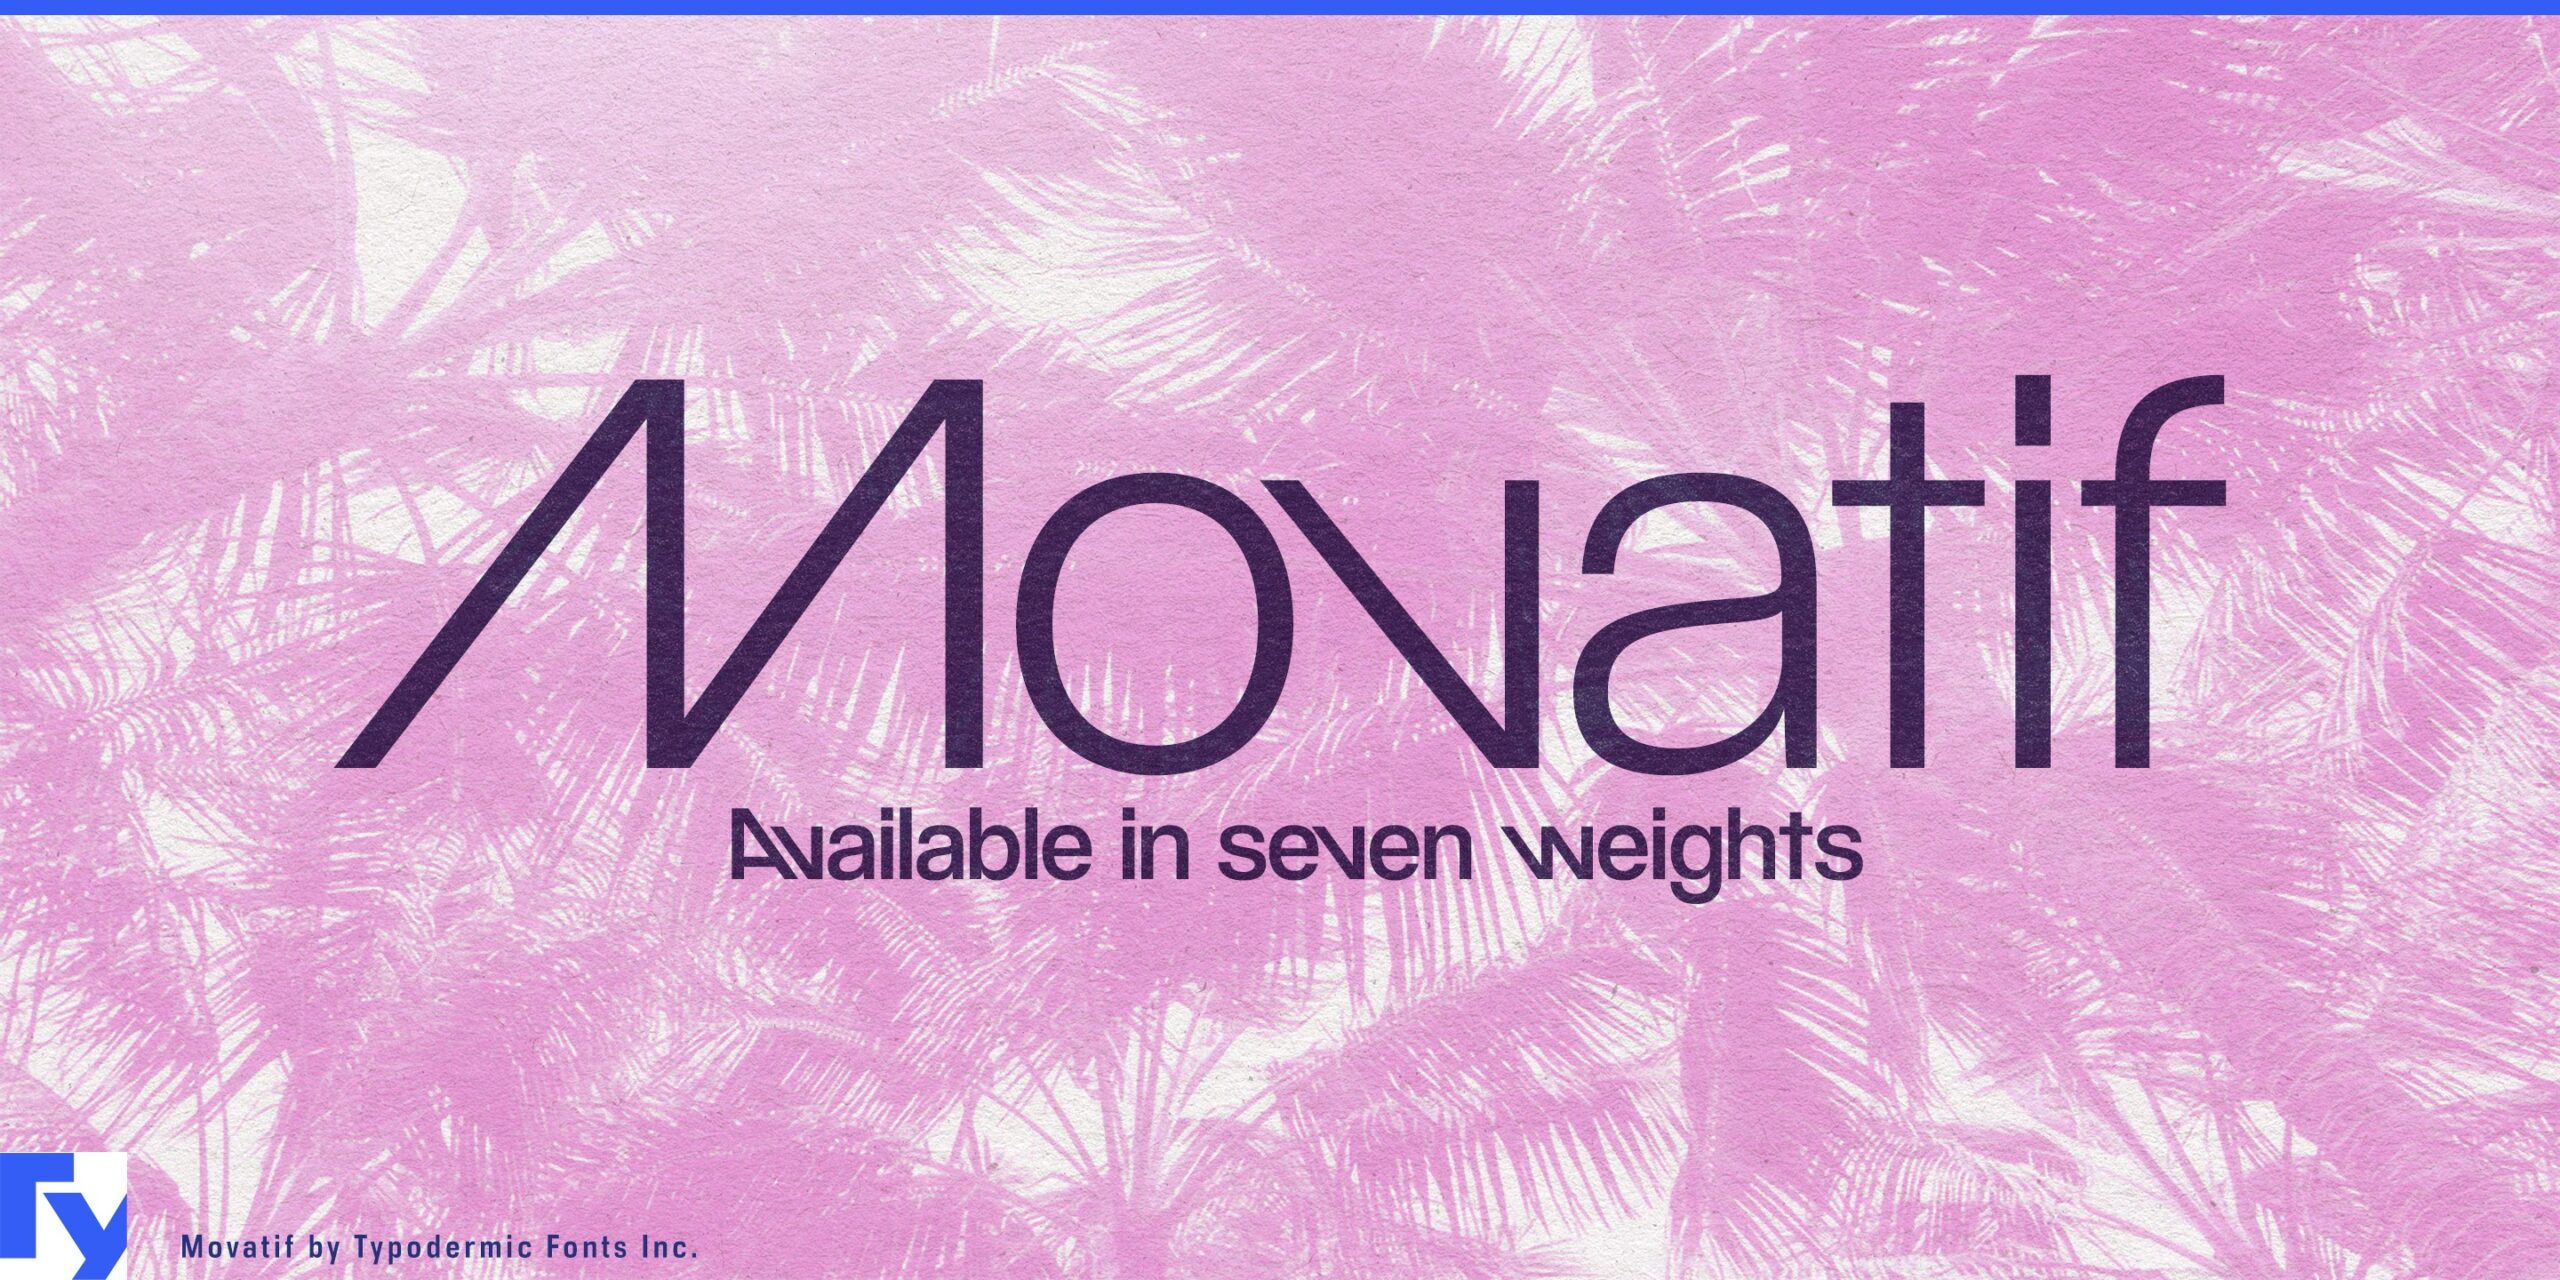 Movatif Typeface: Versatility Meets Fascination in Every Weight